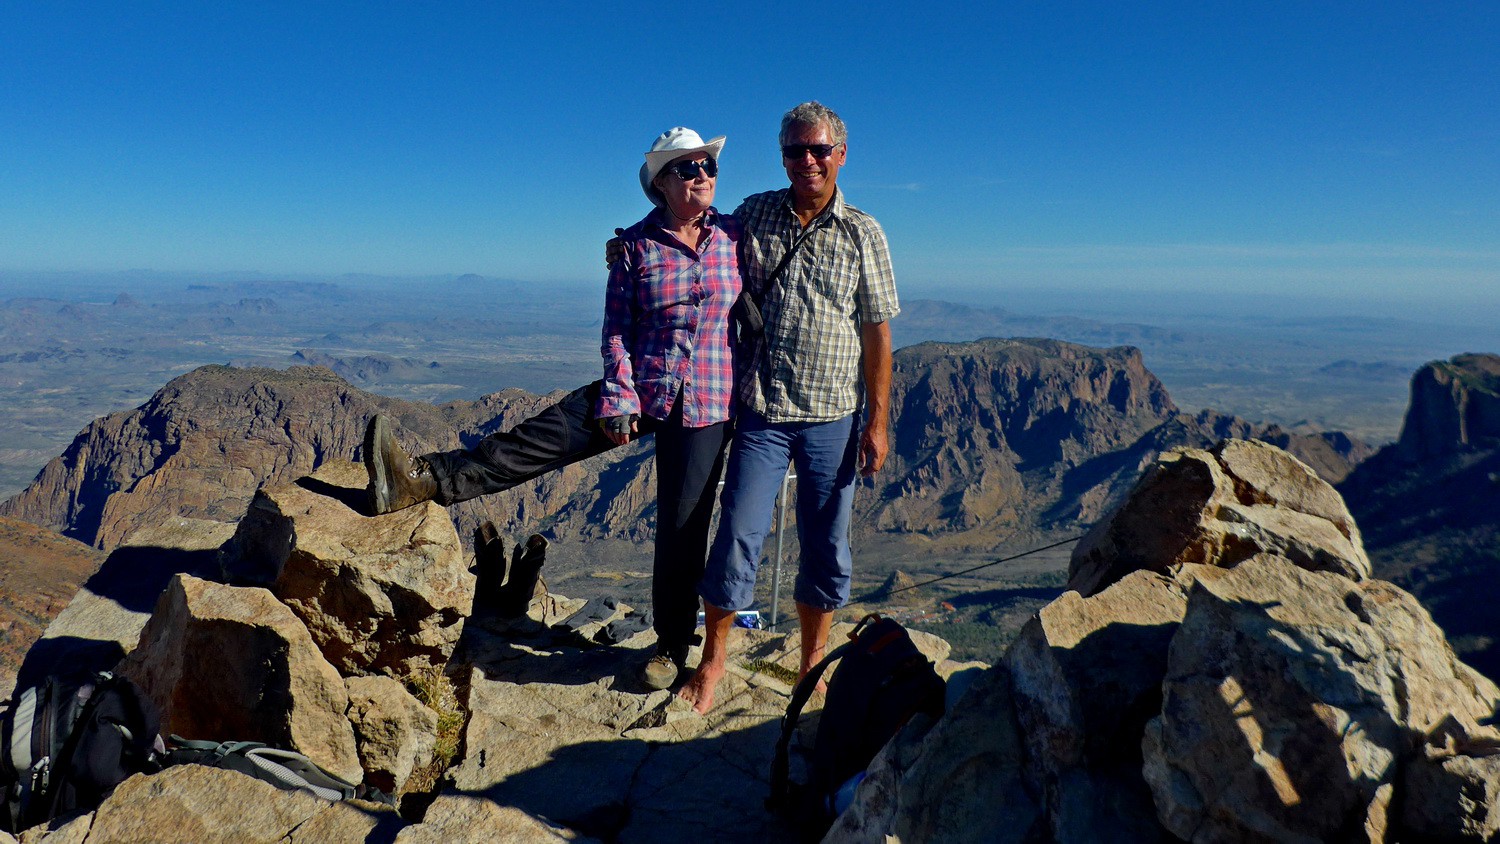 Marion and Alfred on the summit of Emory Peak